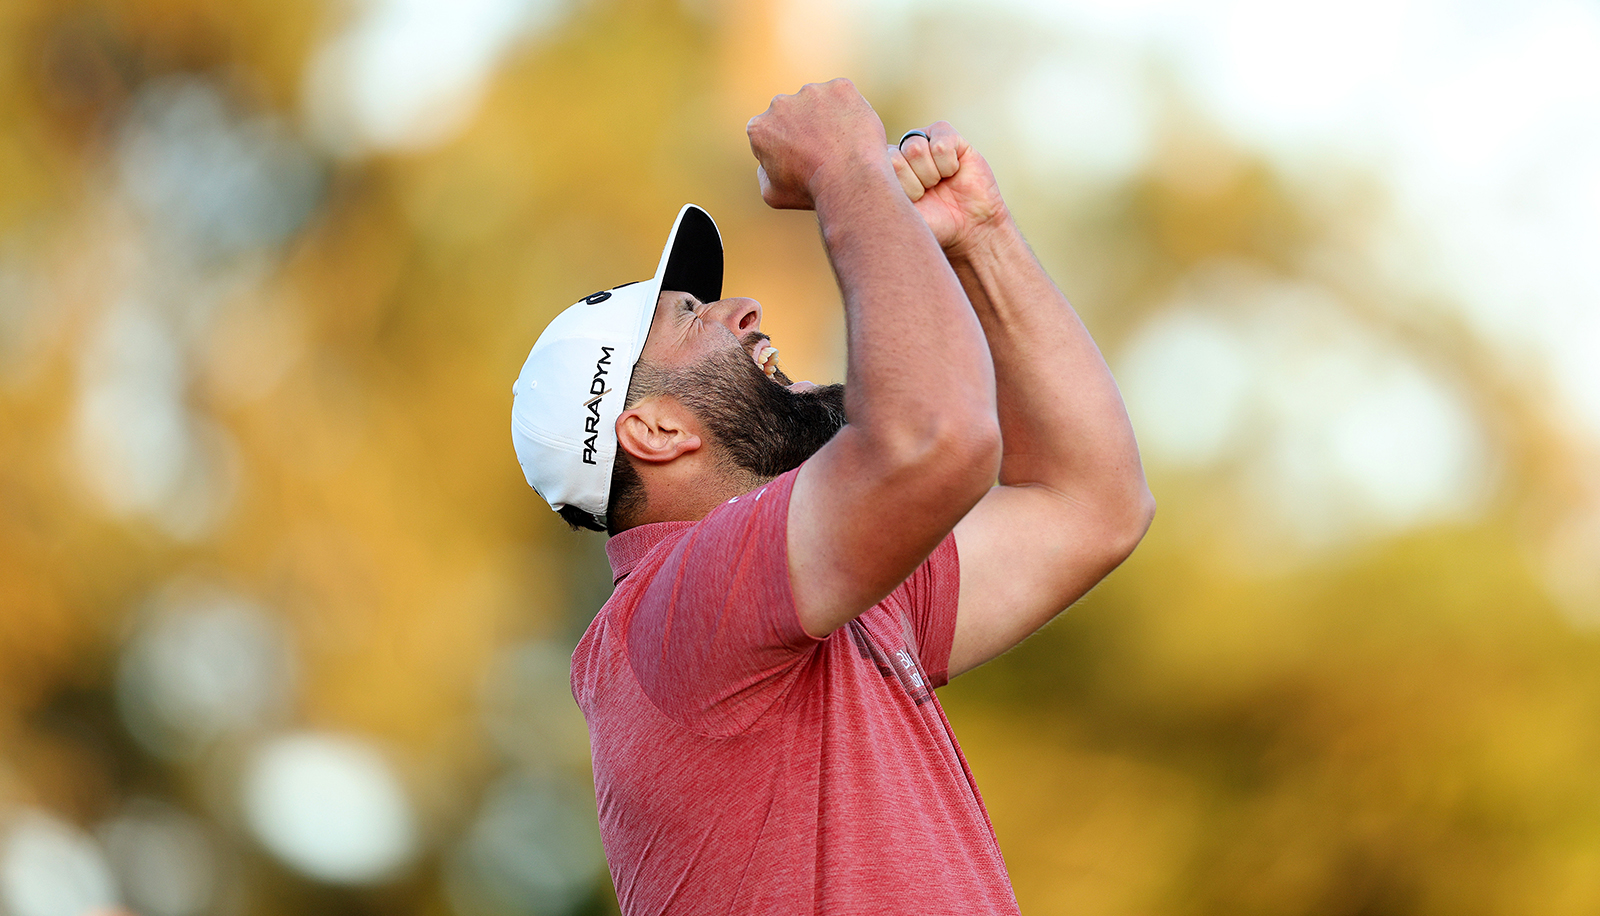 Jon Rahm Wins His 2nd Major Championship at The Masters with Callaway Clubs and Golf Ball